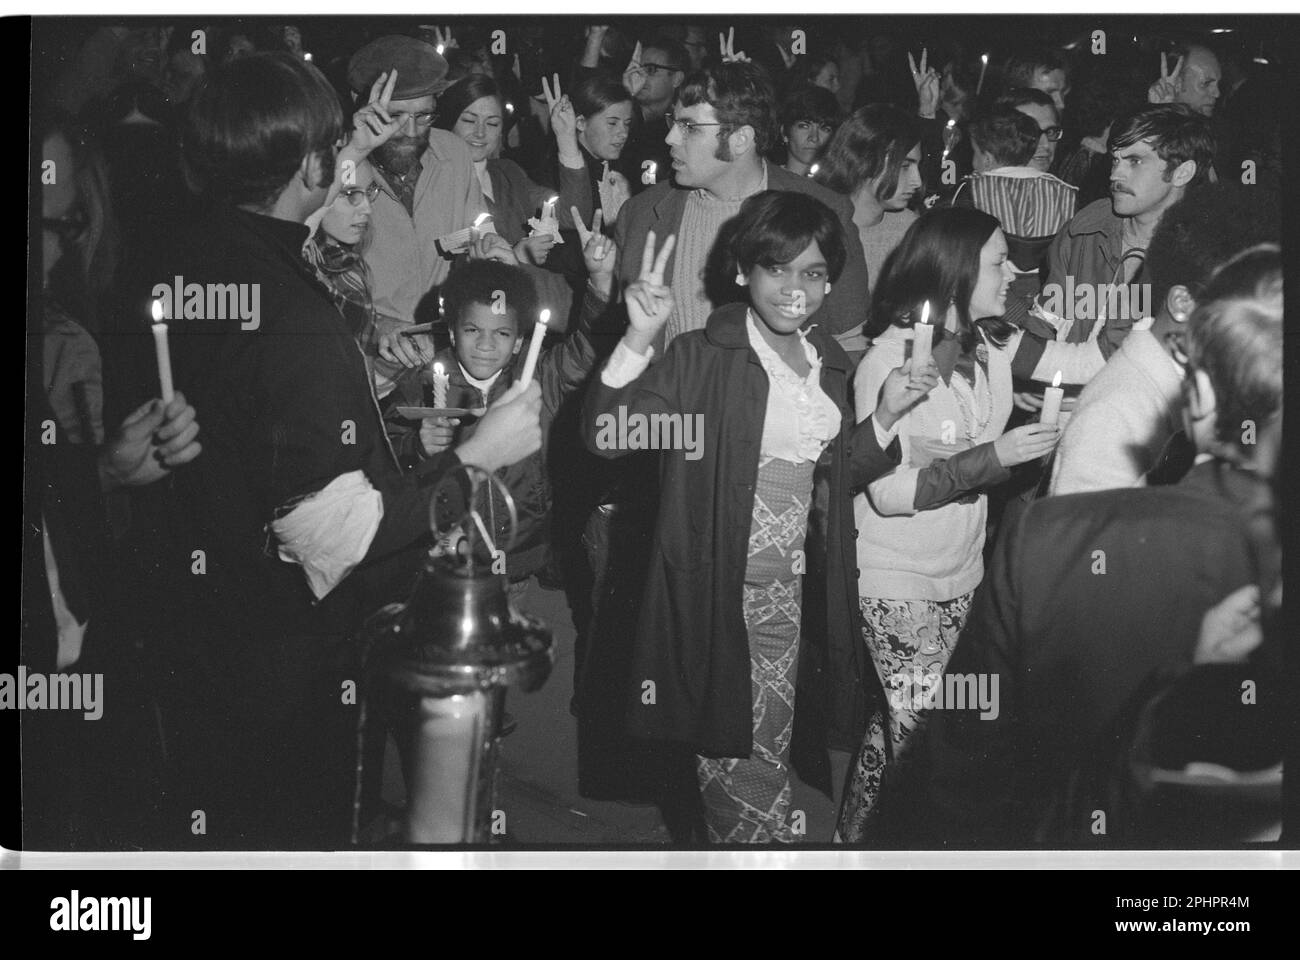 Crowd of people flashing Peace signs and holding candles, including African Americans, at a march at night to the White House, led by Coretta Scott King as part of the Moratorium to End the War in Vietnam, Washington, DC, October 15, 1969. Photo by Warren K Leffler/US News and World Report Magazine Collection) Stock Photo